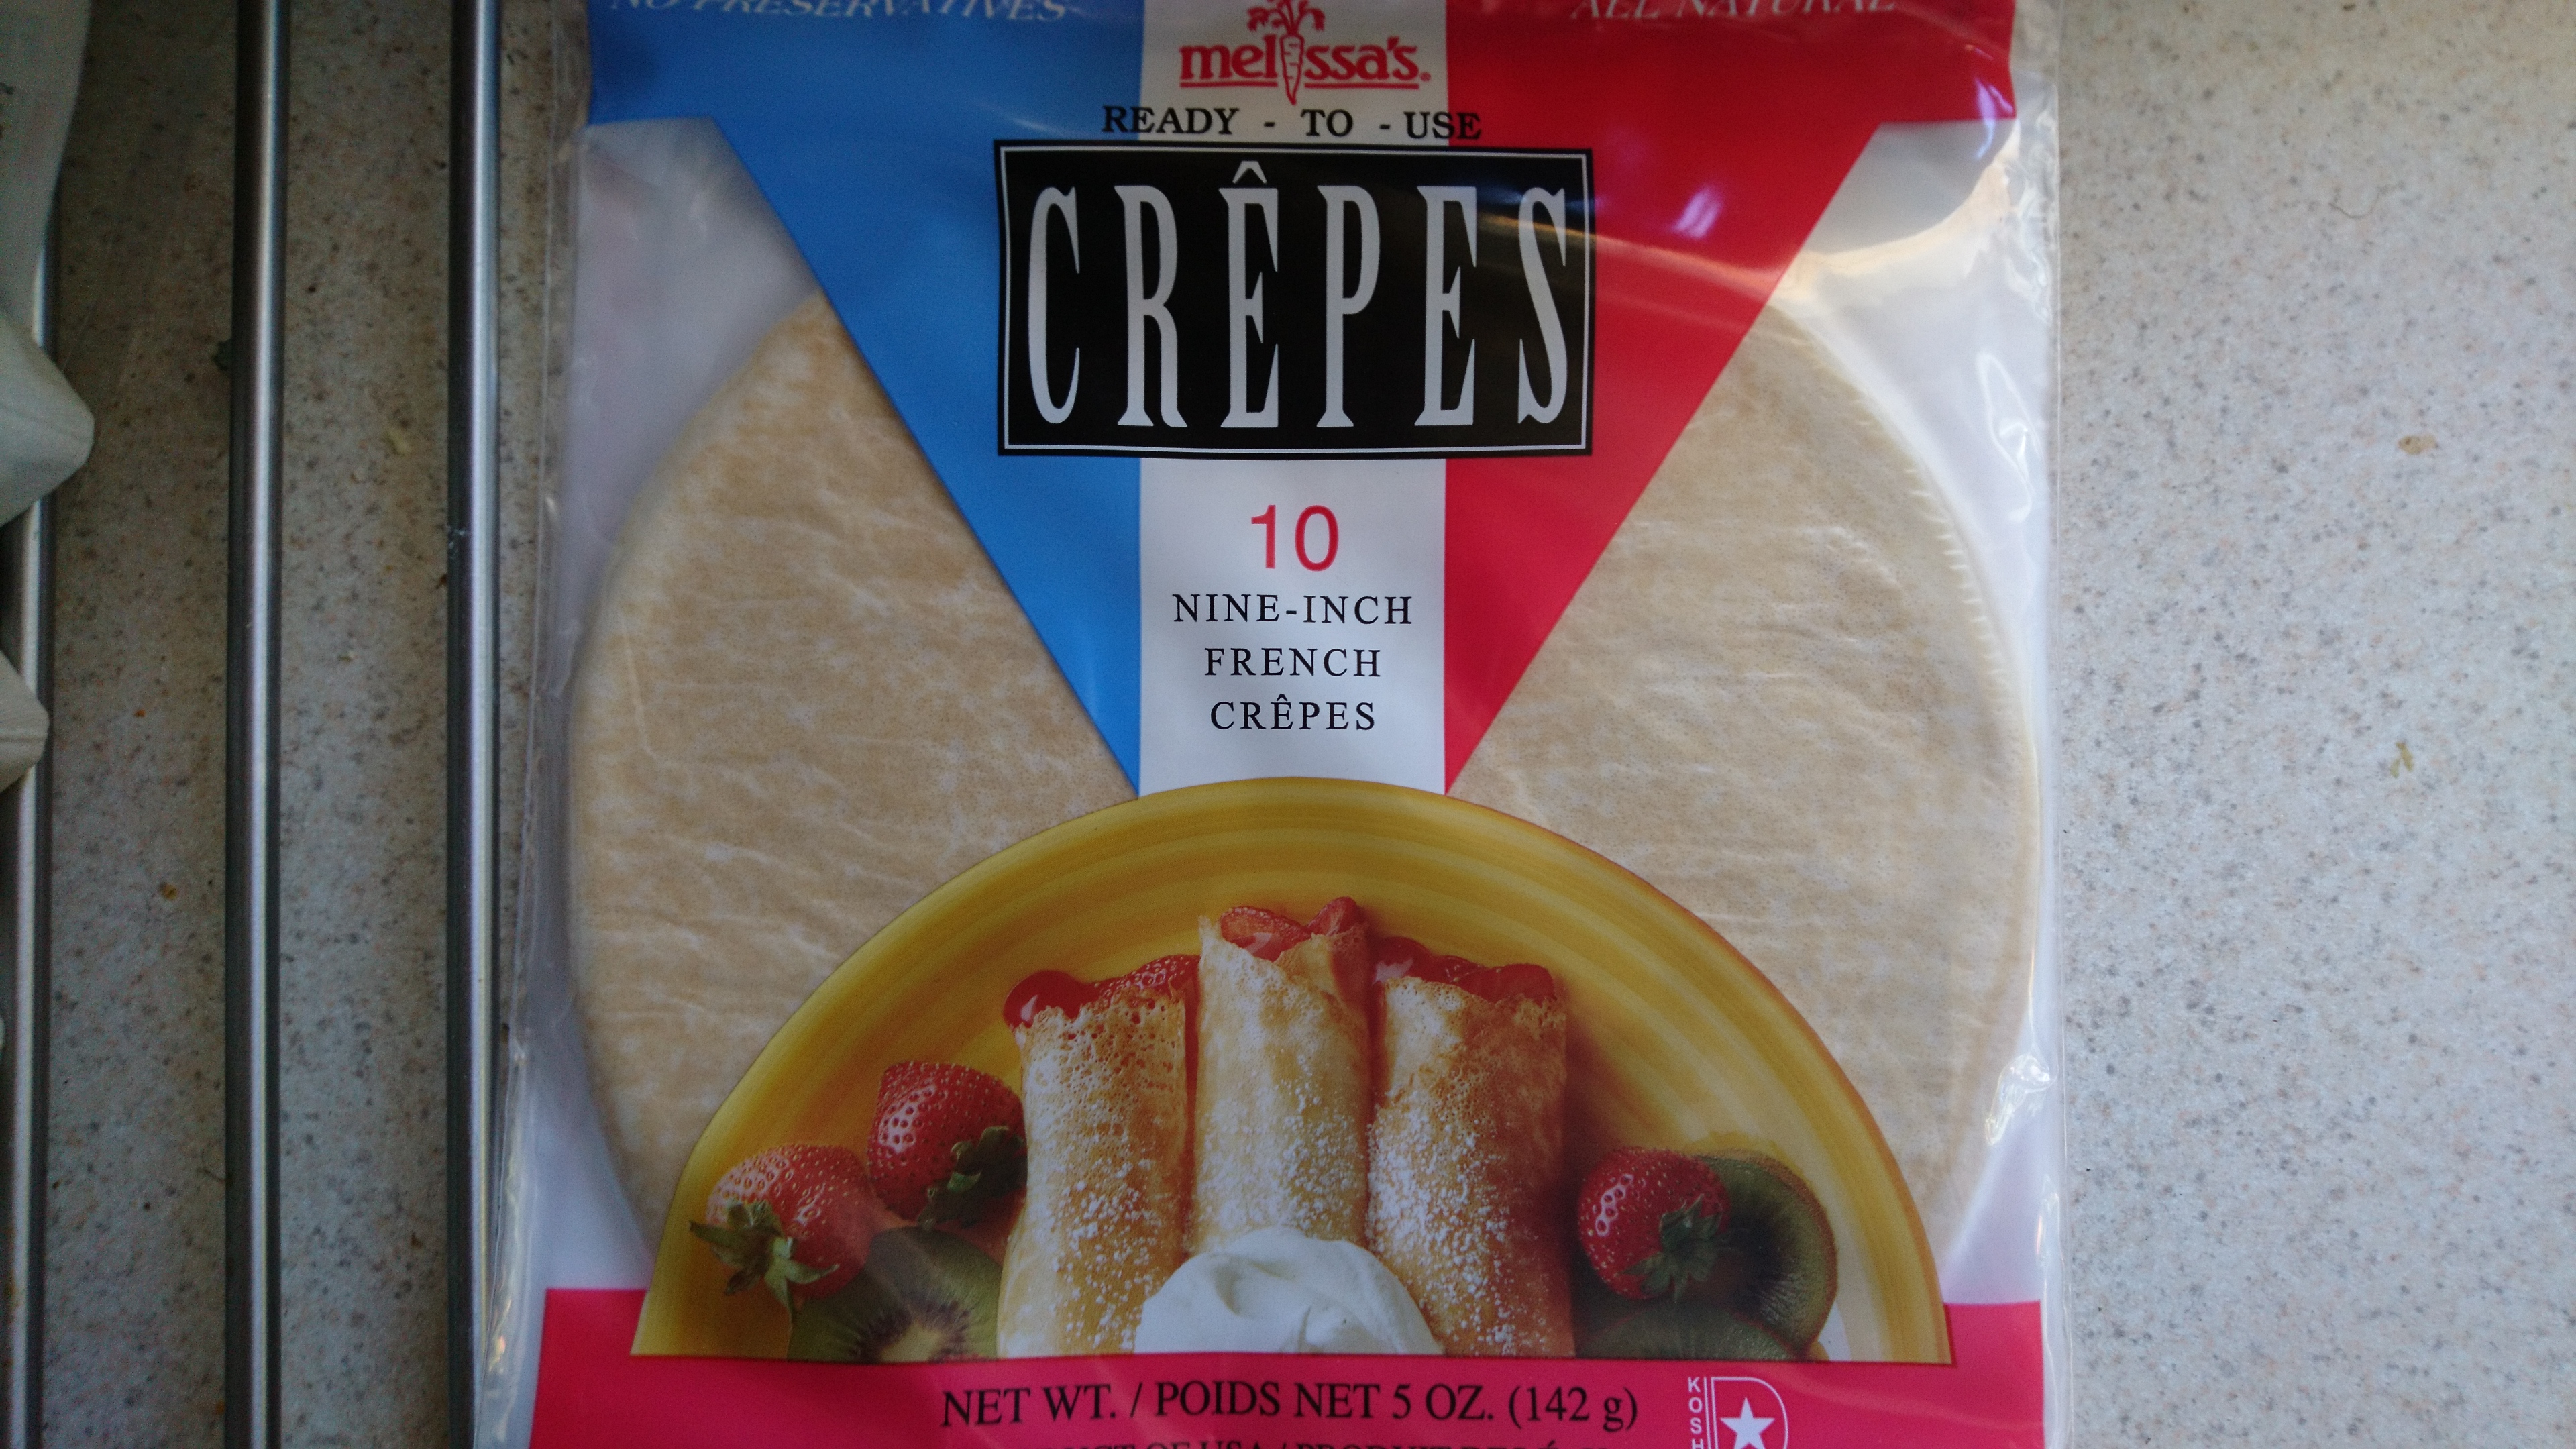 package of melissa's brand crepes